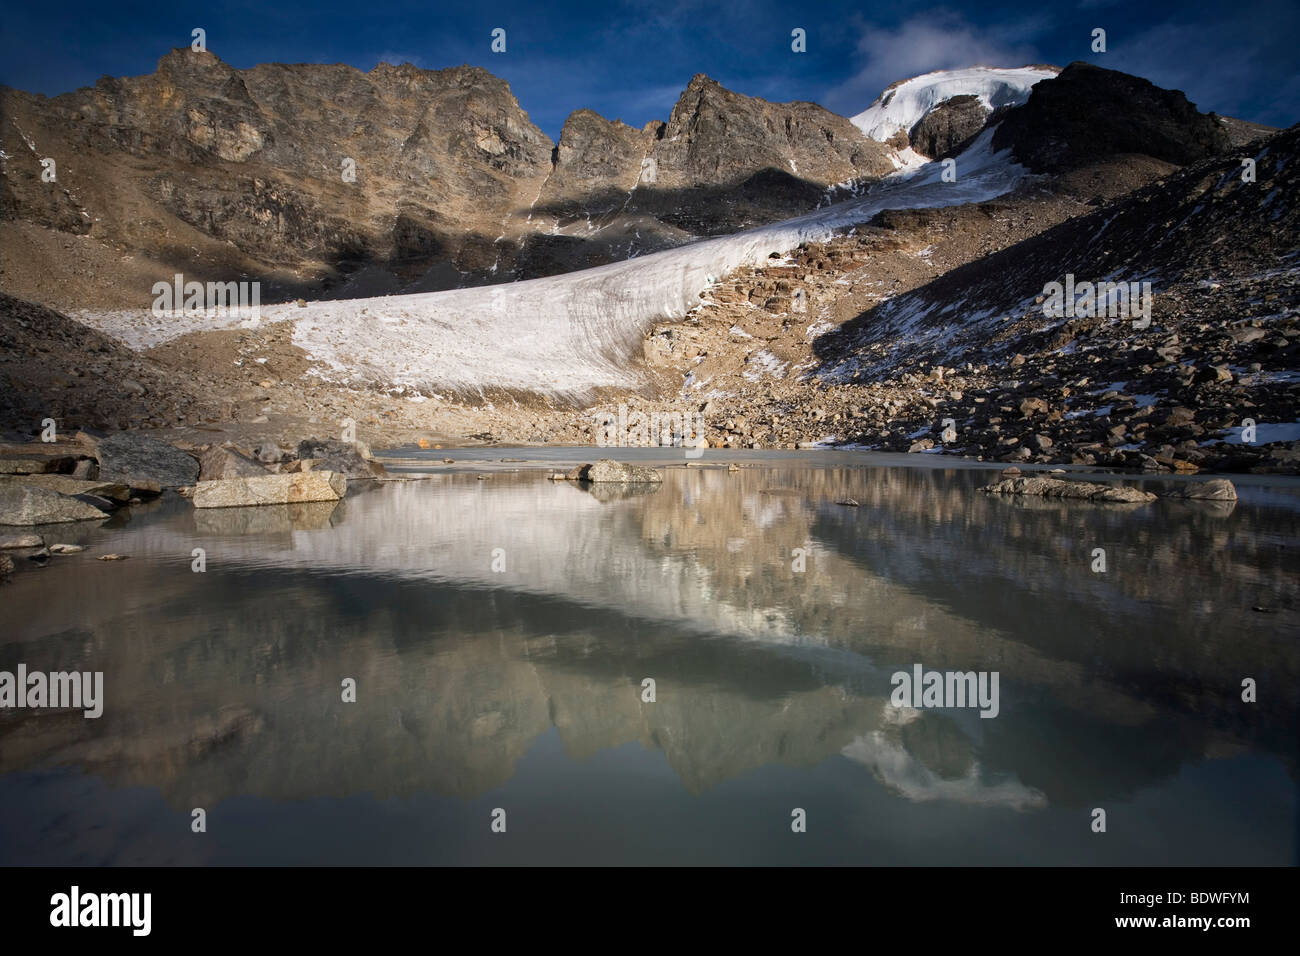 Mt. L'Angelo Grande reflected in a glacial lake, Ortler mountain range, Stelvio National Park, South Tyrol, Italy, Europe Stock Photo